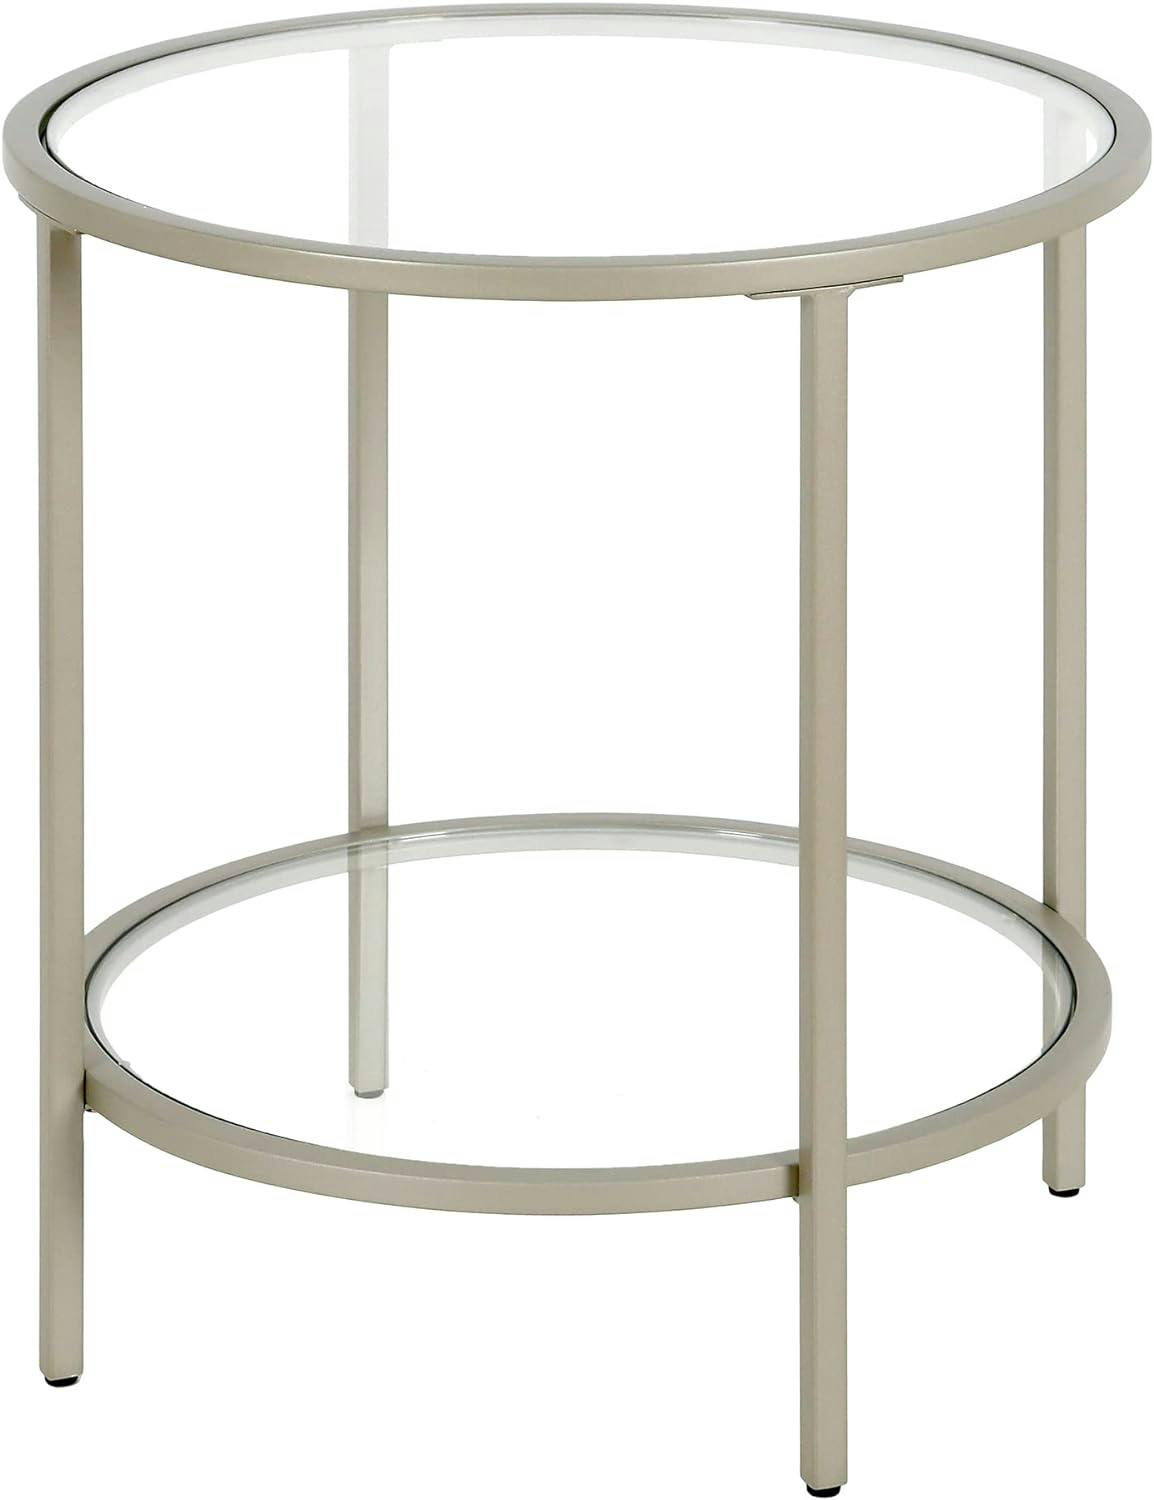 Satin Nickel 20" Round Metal & Glass Side Table with Shelf